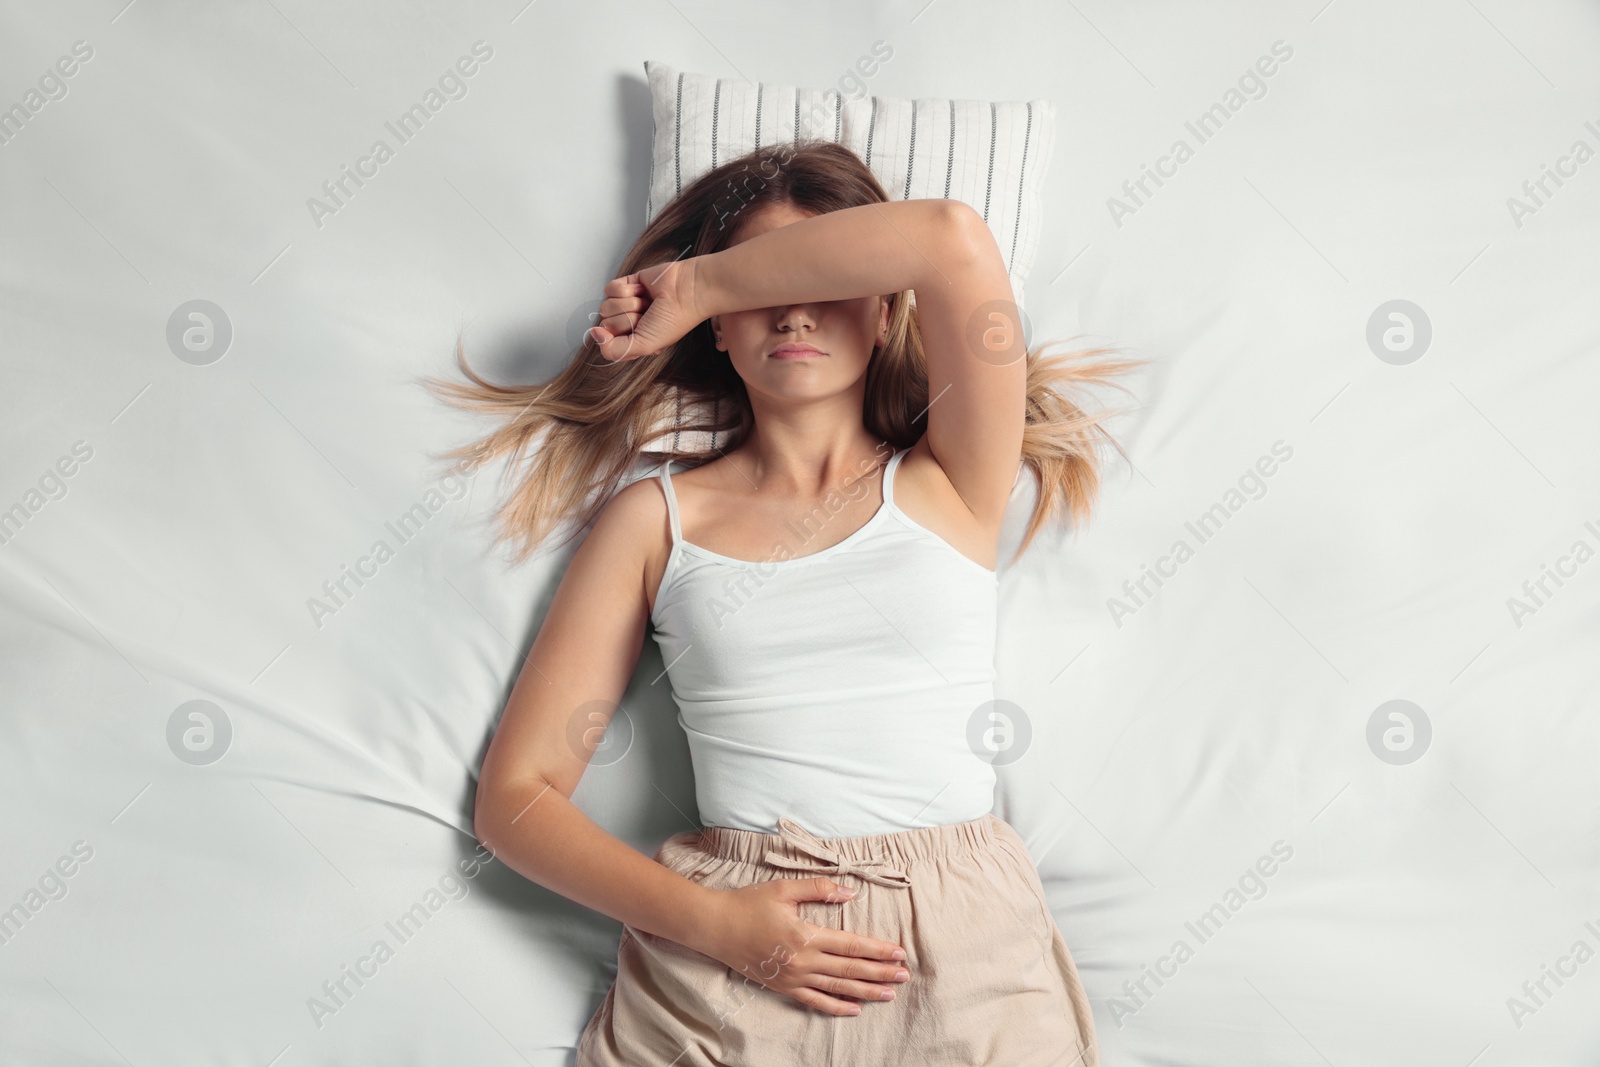 Photo of Young woman suffering from menstrual pain in bed, top view